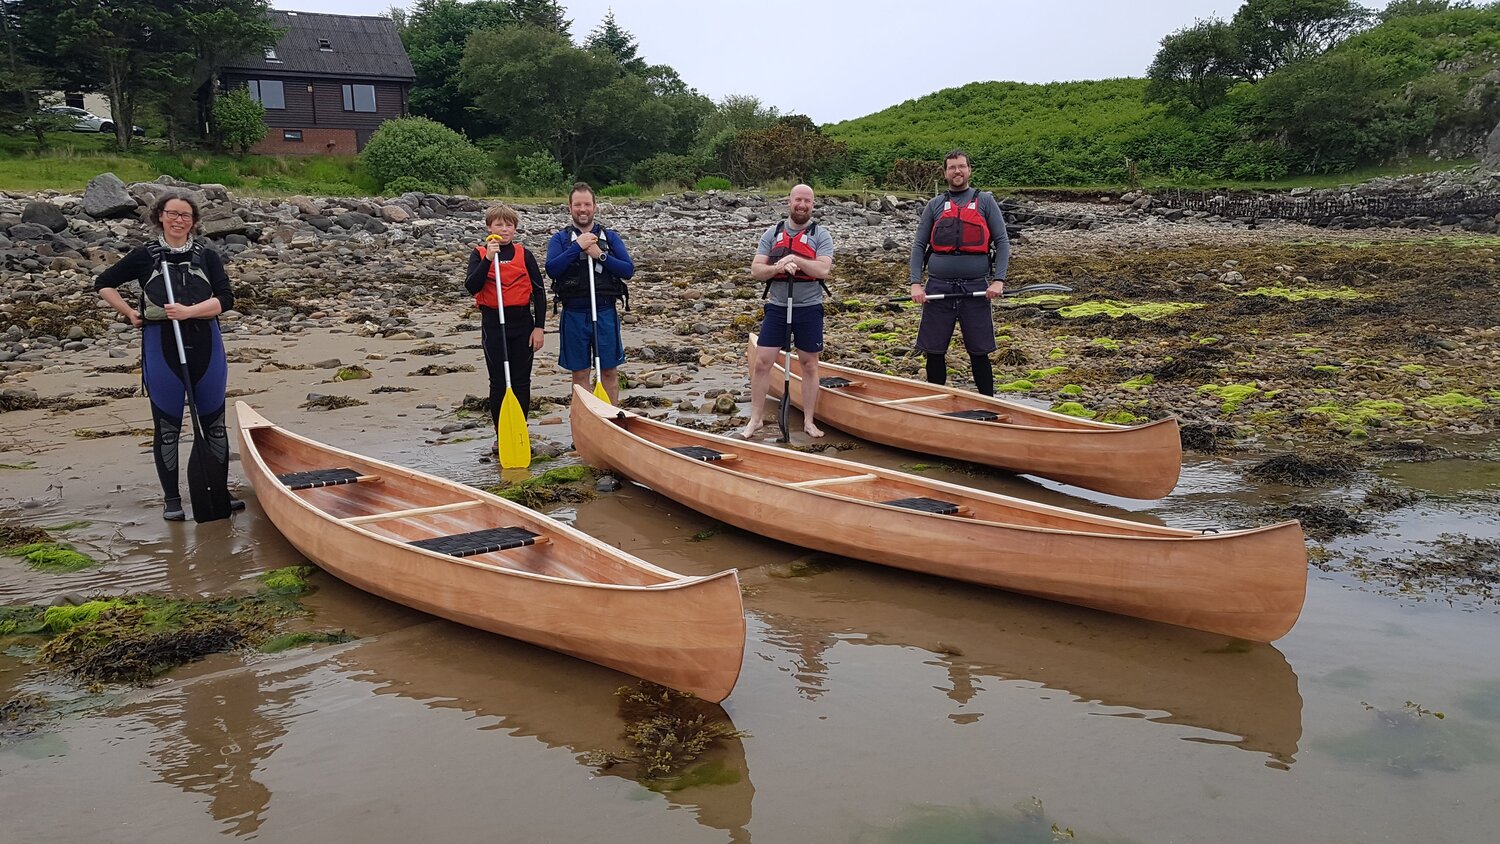 Five people standing next to three newly built wooden canoes